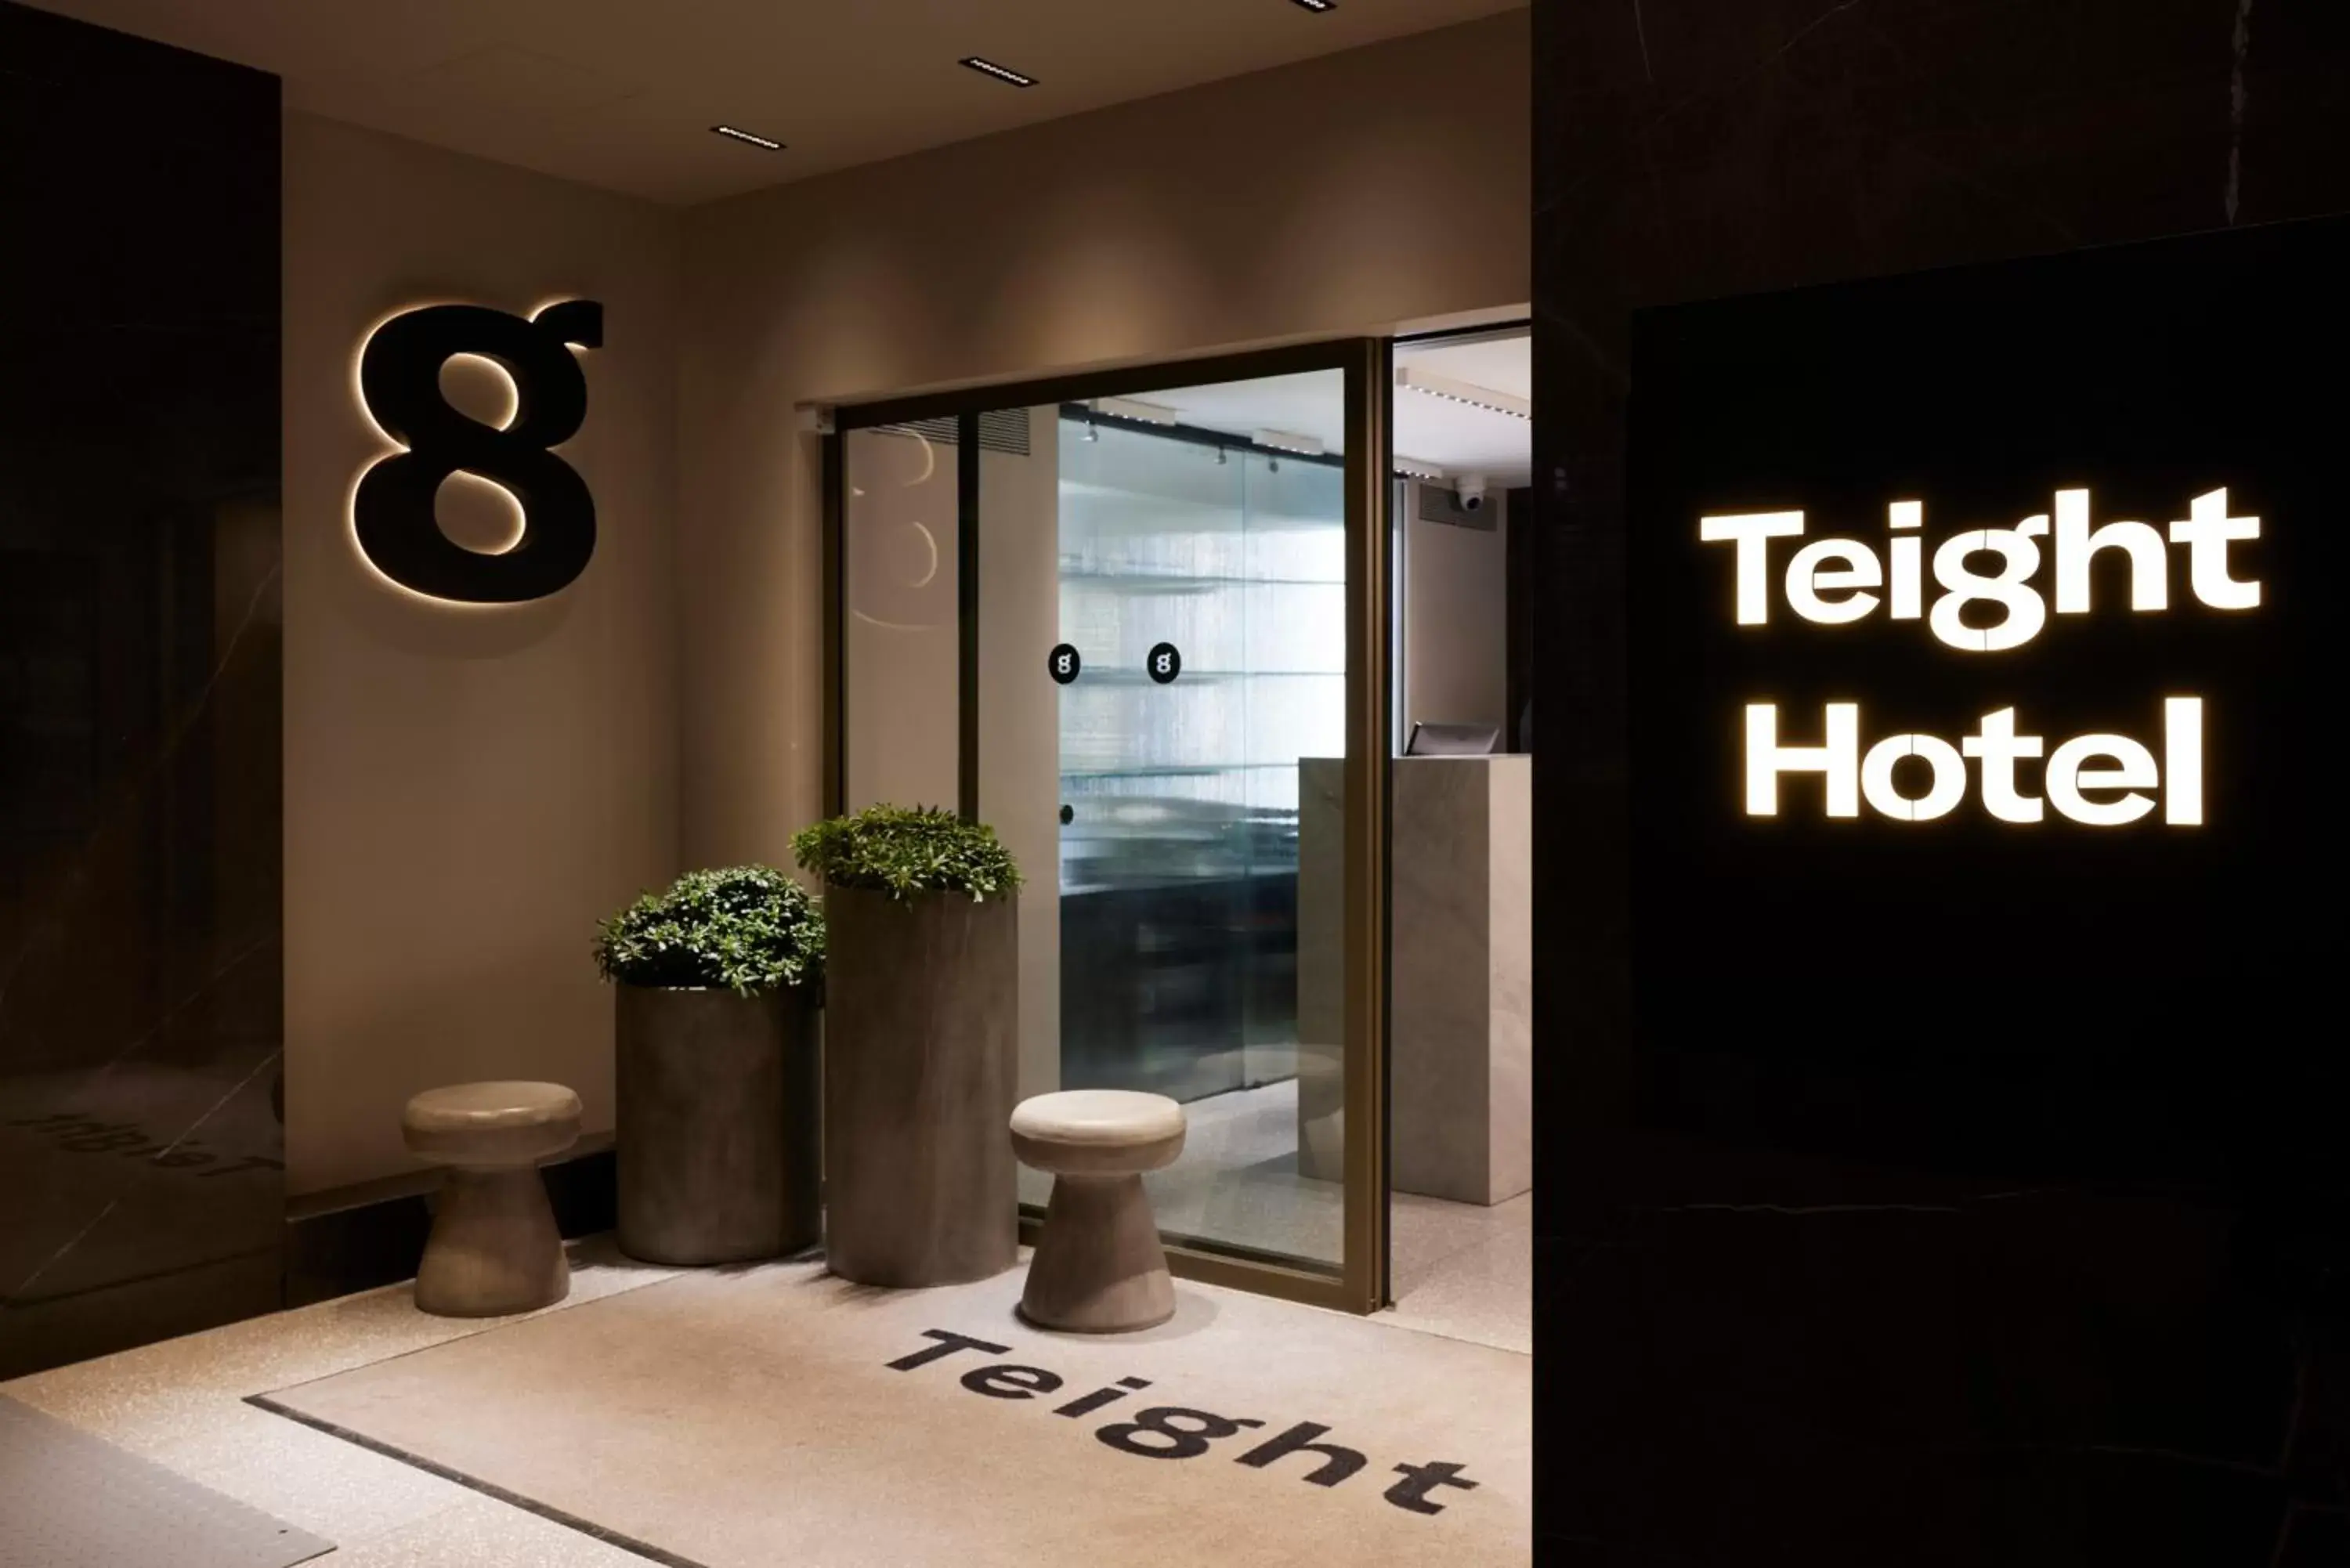 Property logo or sign in Teight Hotel